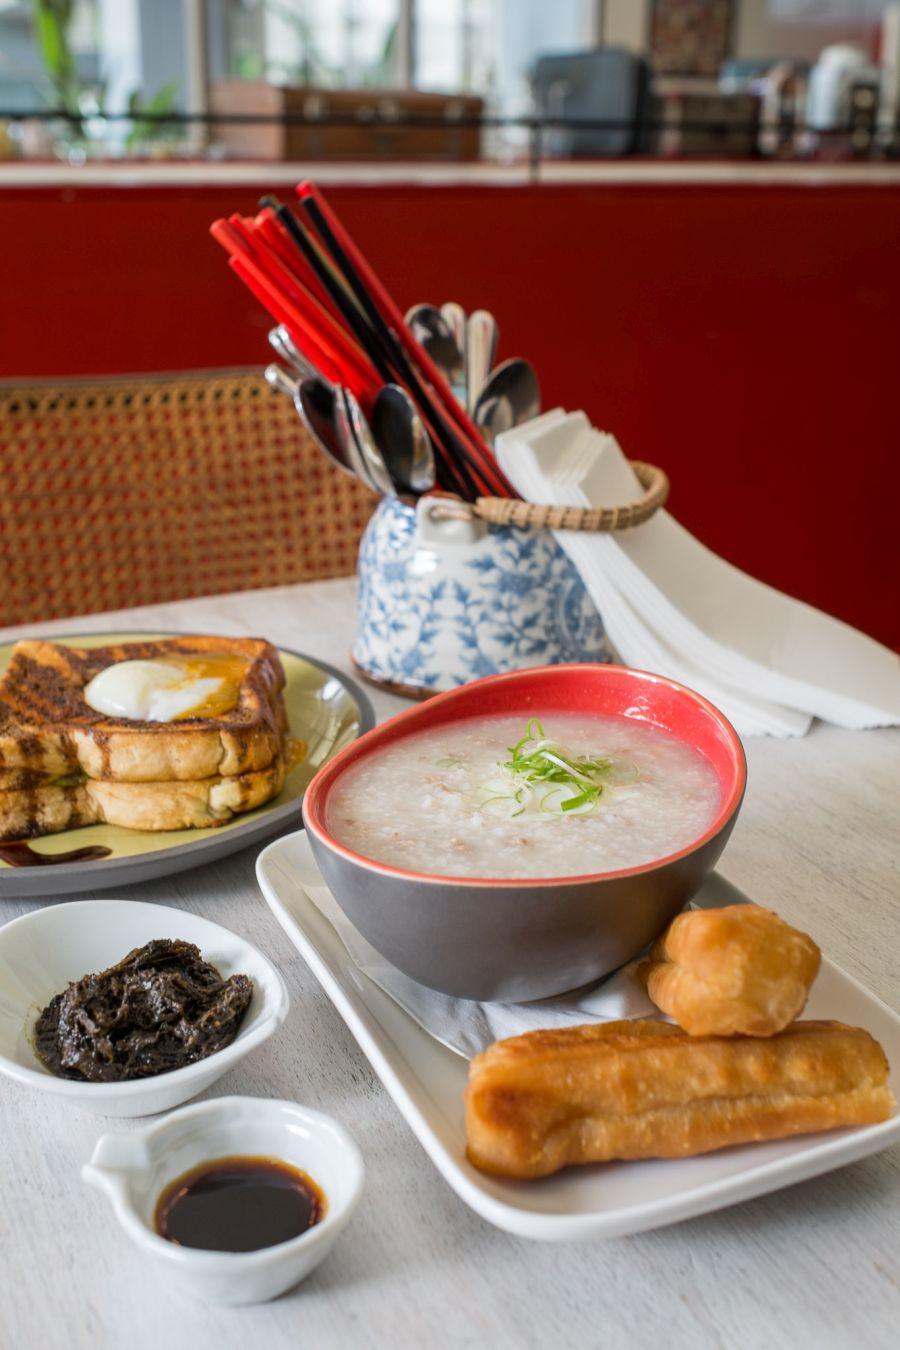 Pork mince and spring onion congee, 62C egg, Chinese doughnut (AU$9) - with must-have mustard pickle on the side